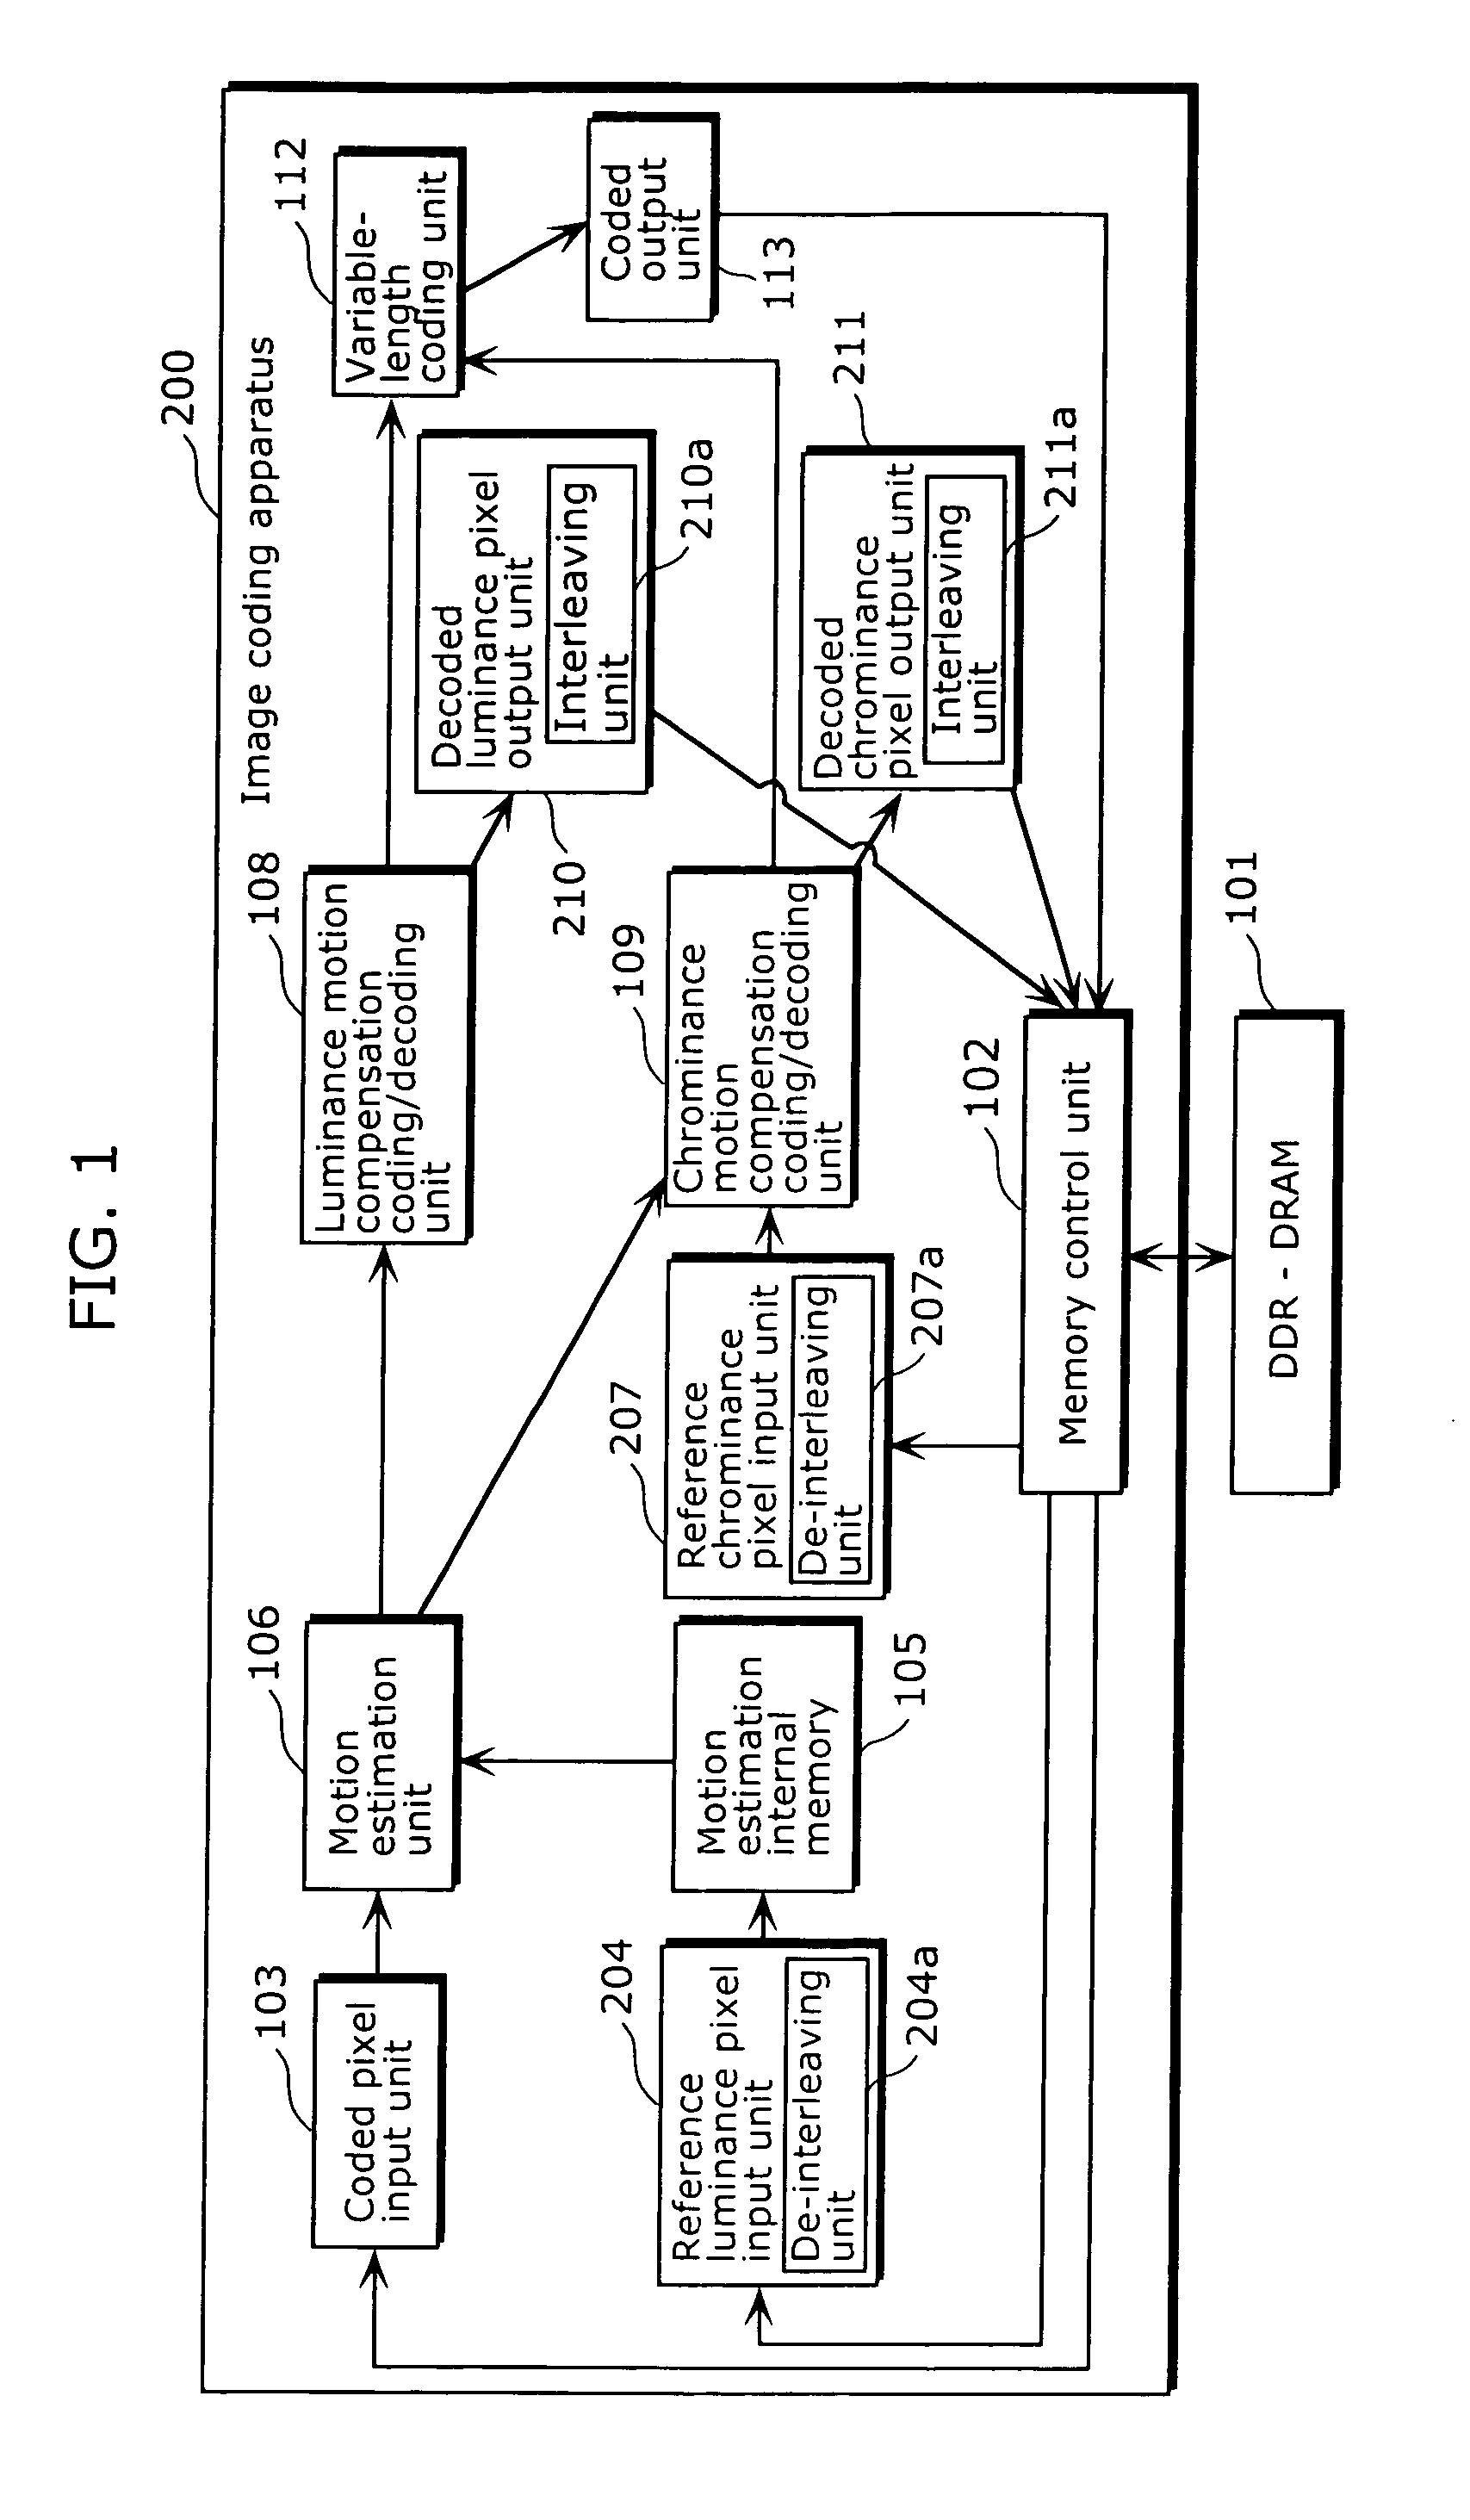 Image processor and image processing method